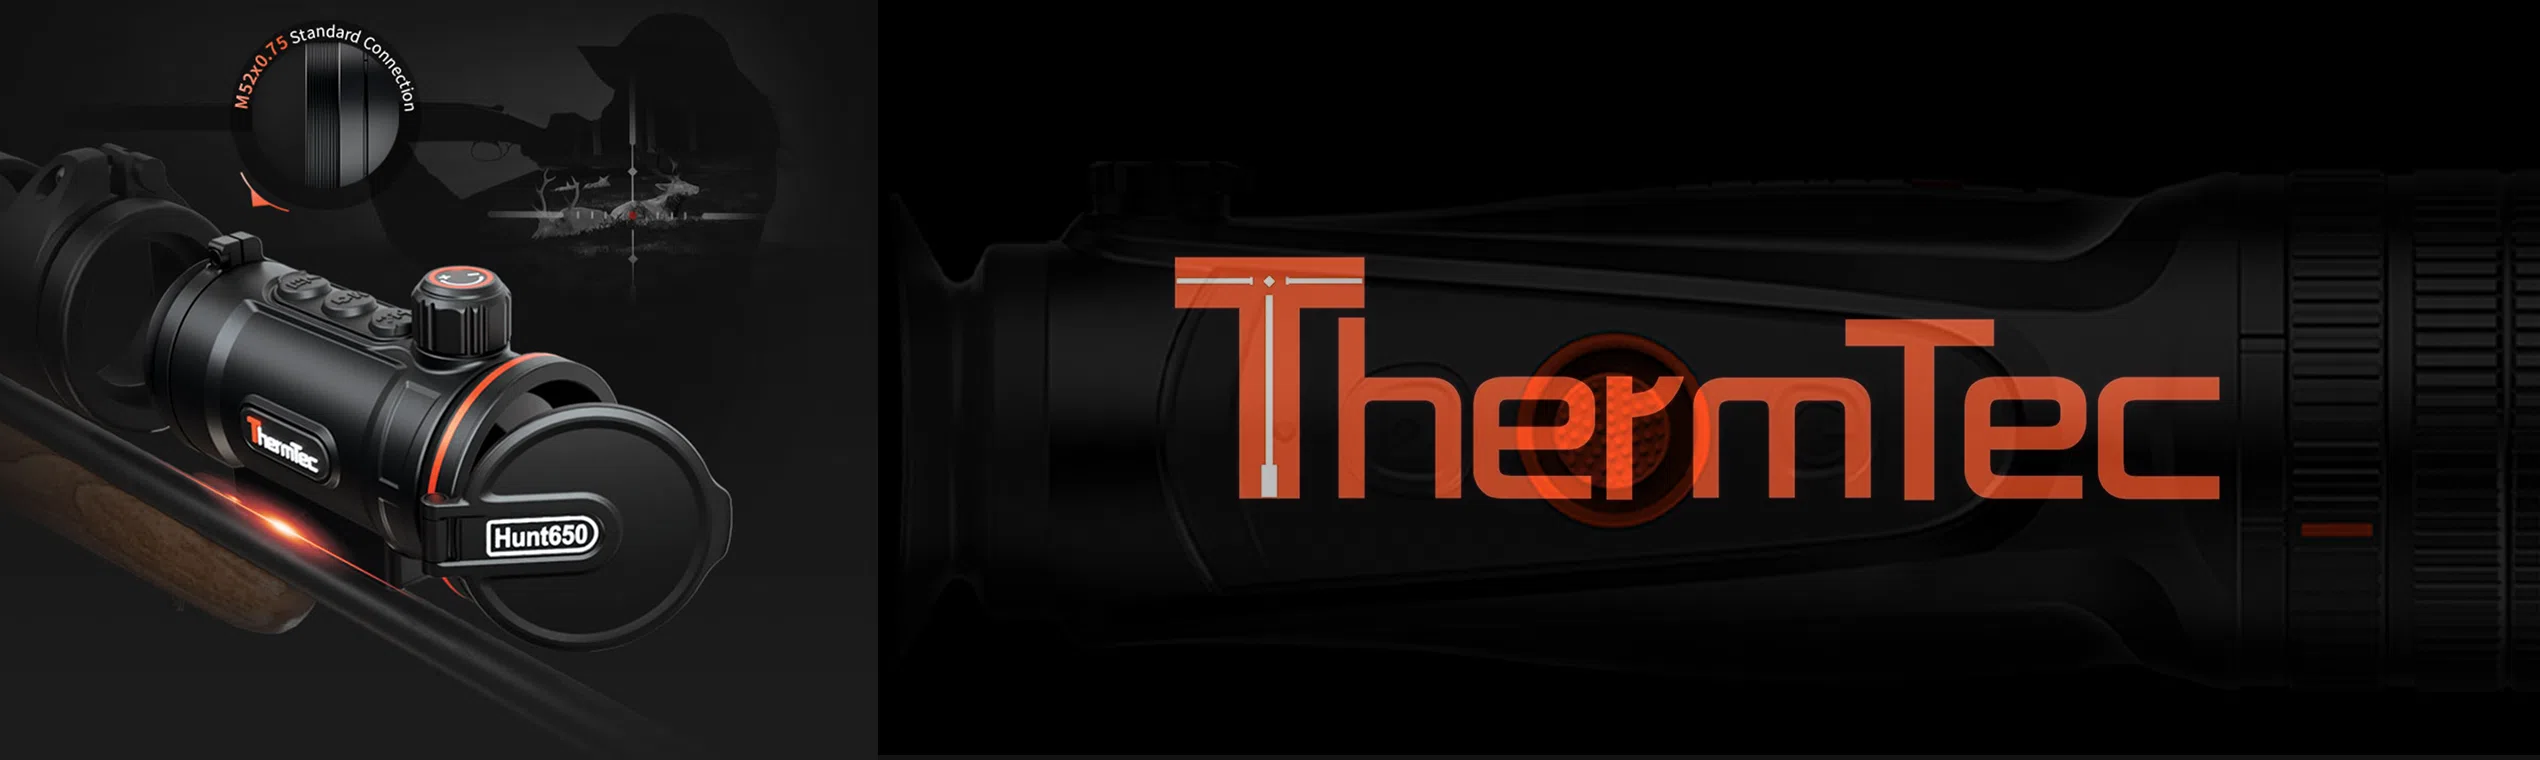 Thermal imaging cameras by ThermTec